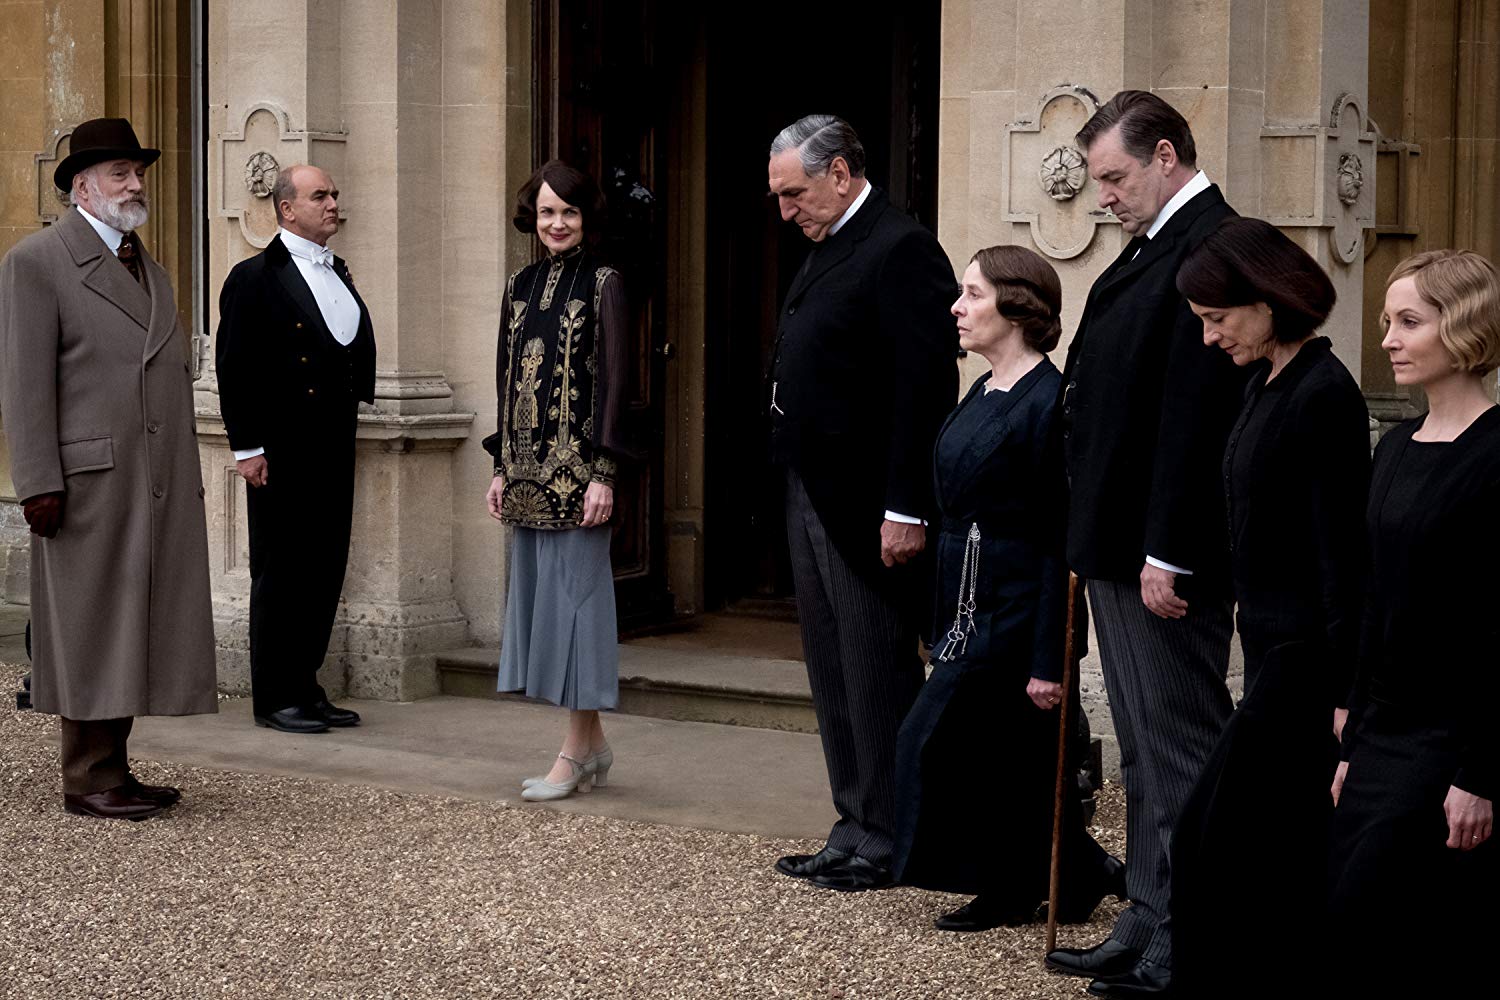 downton abbey the movie review